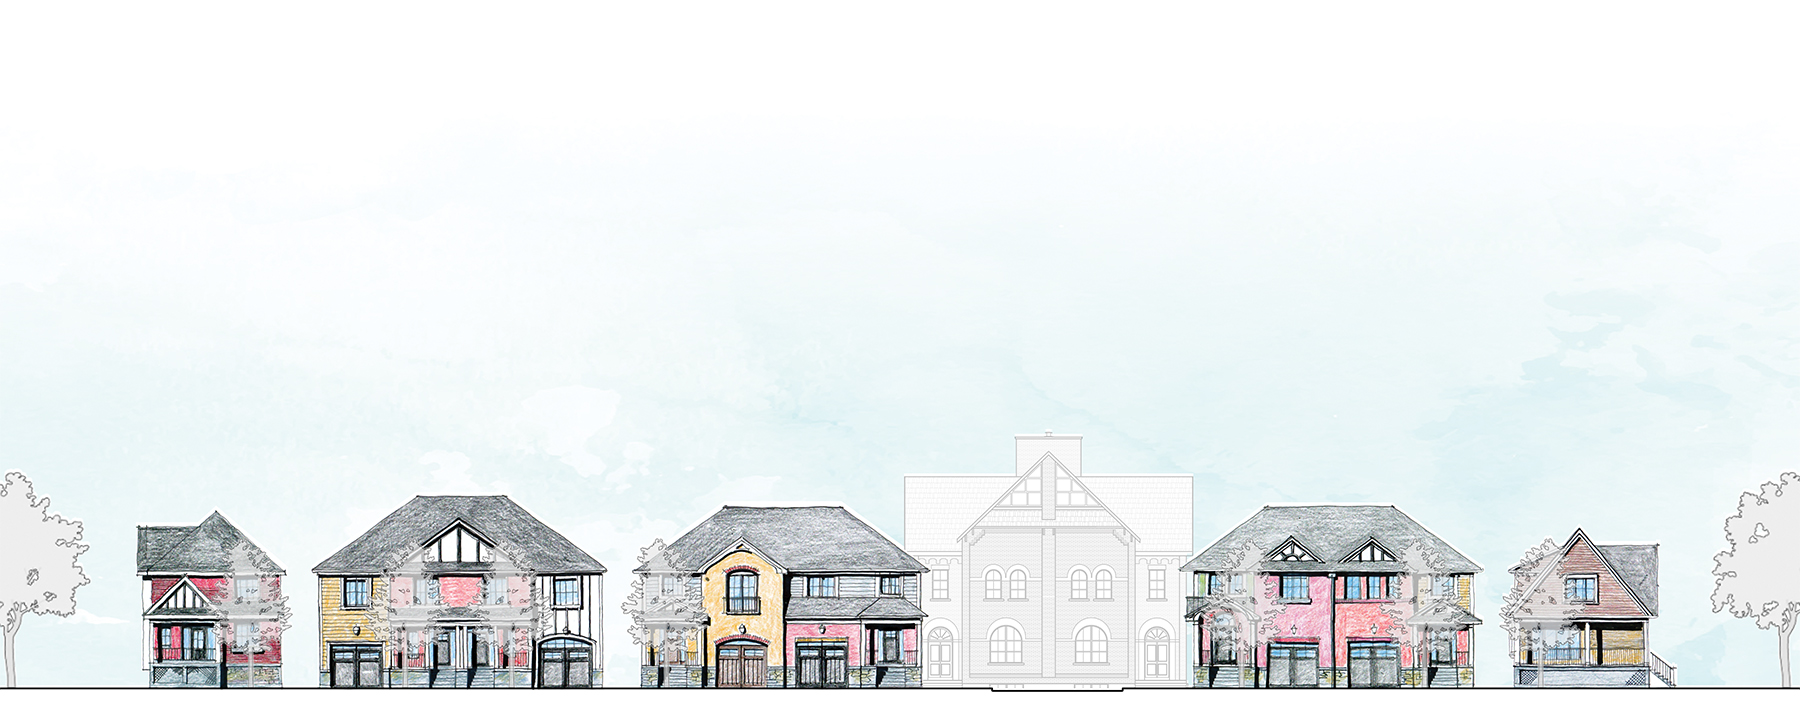 The Maple Street Limited/Georgian Communities proposal for the Victoria Annex site includes 19 residential units and incorporates the former schoolhouse.